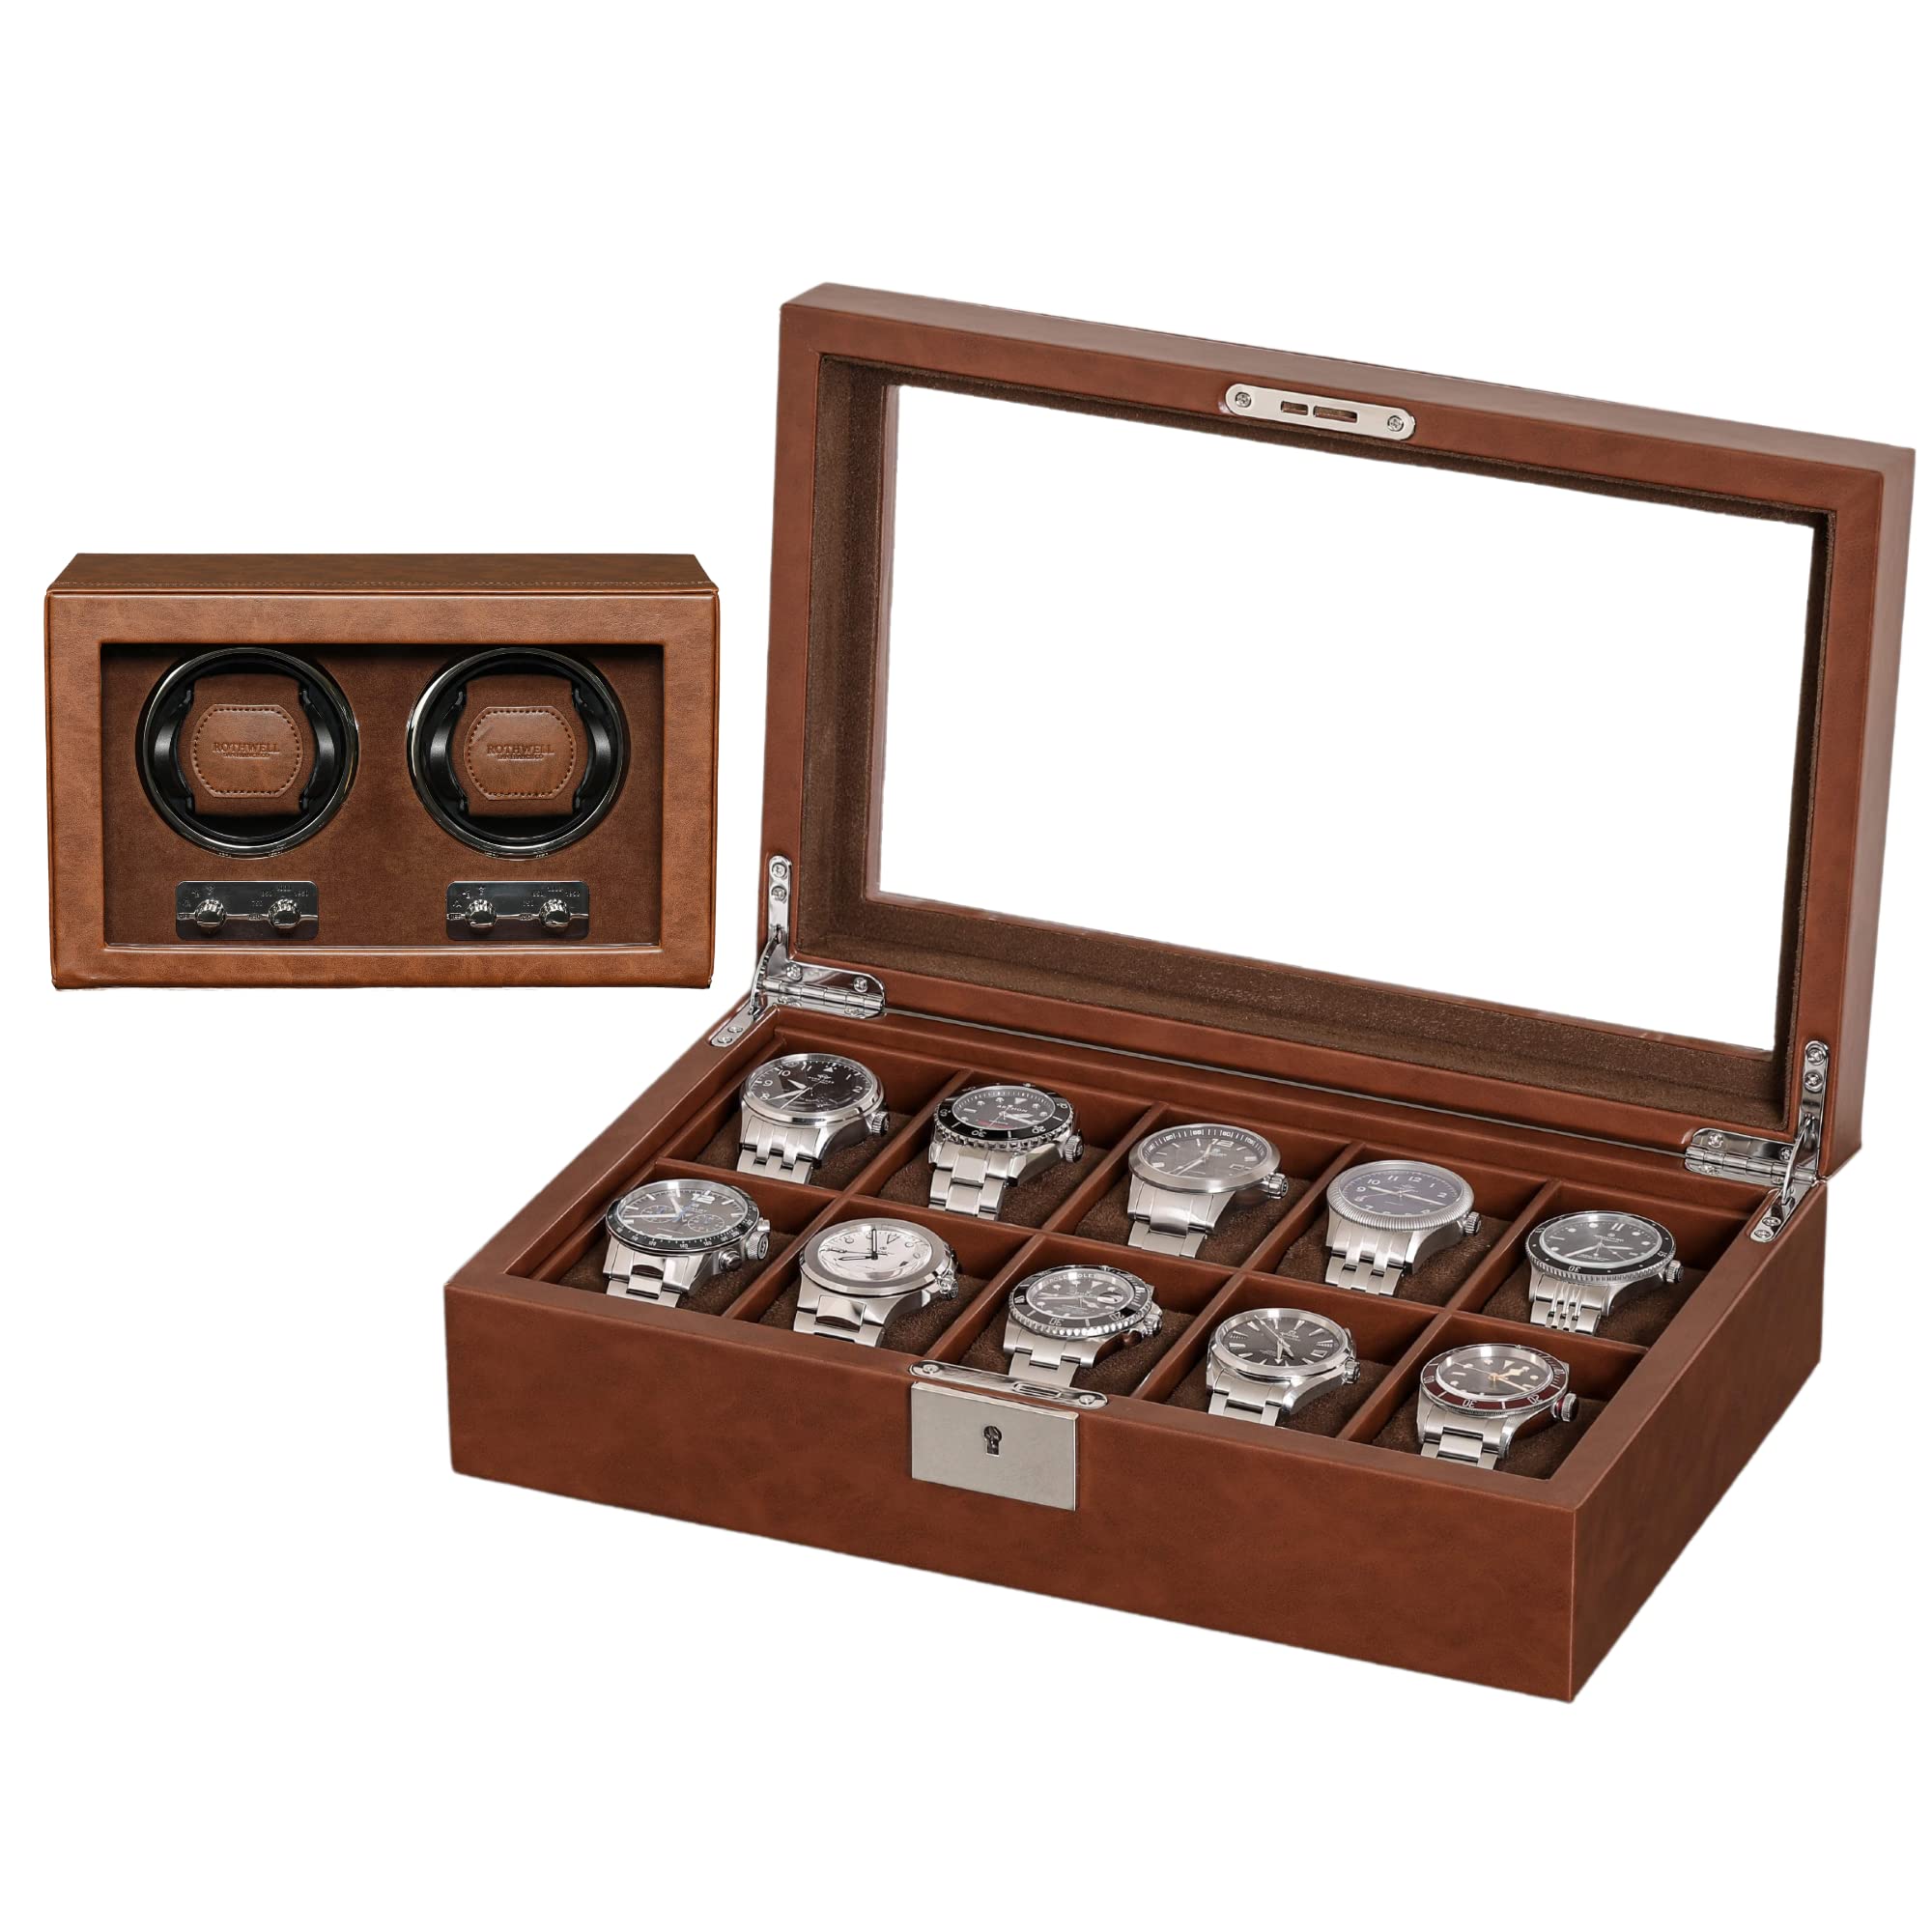 ROTHWELL Gift Set 10 Slot Leather Watch Box & Matching Double Watch Winder - Luxury Watch Case Display Organizer, Locking Men's Jewelry Watches Holder, Men's Storage Boxes Glass Top Tan/Brown